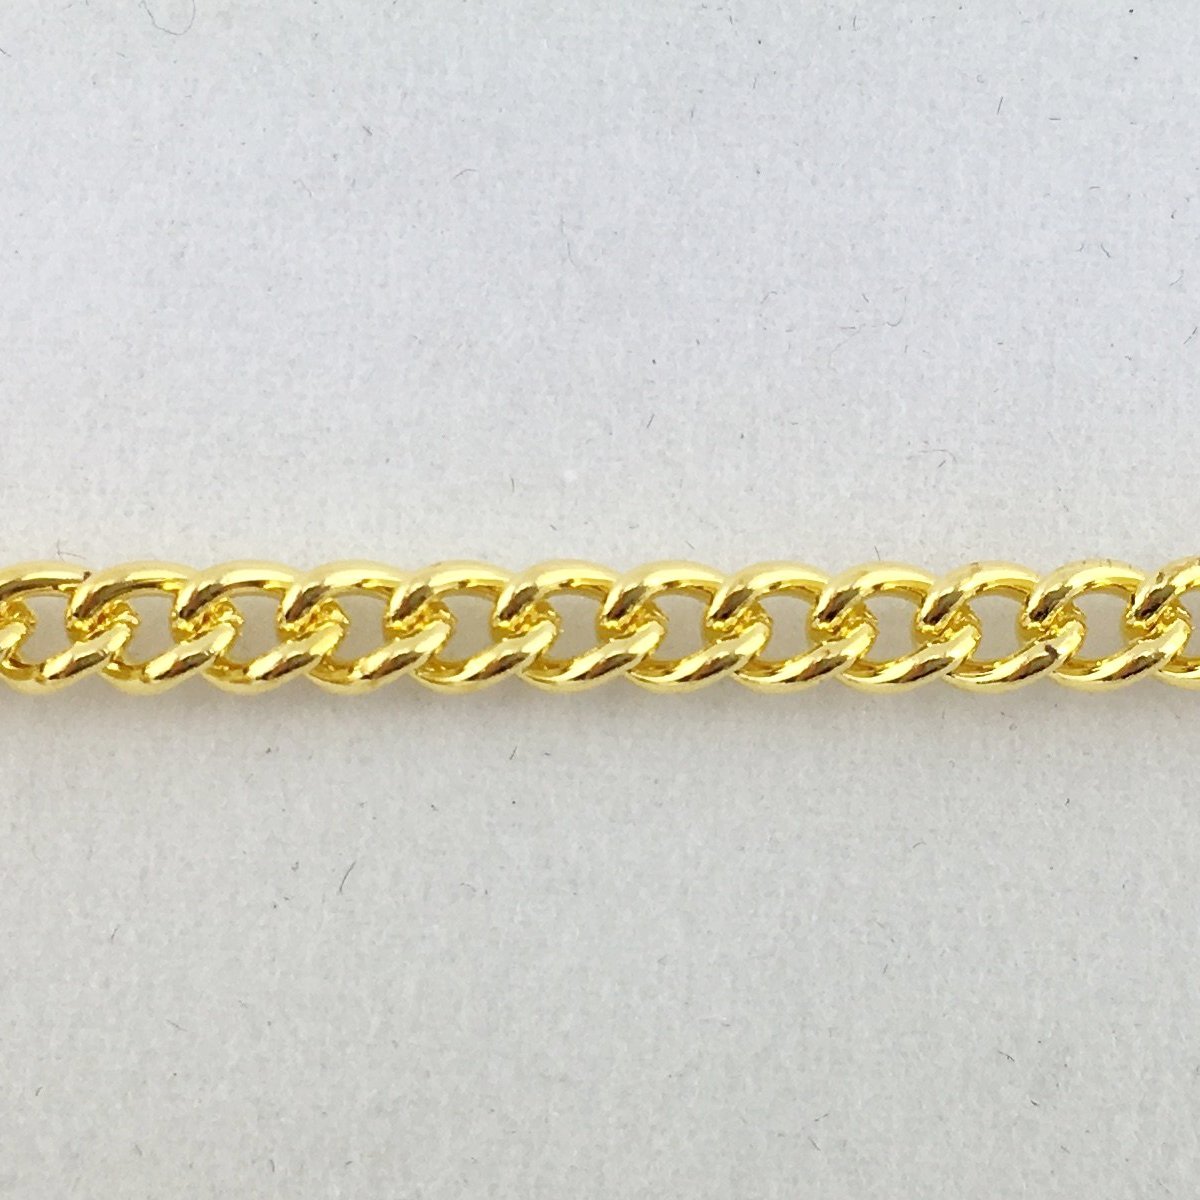 Gold Curb Jewellery Chain size: C200 x 25m, Melbourne and Australia wide delivery.